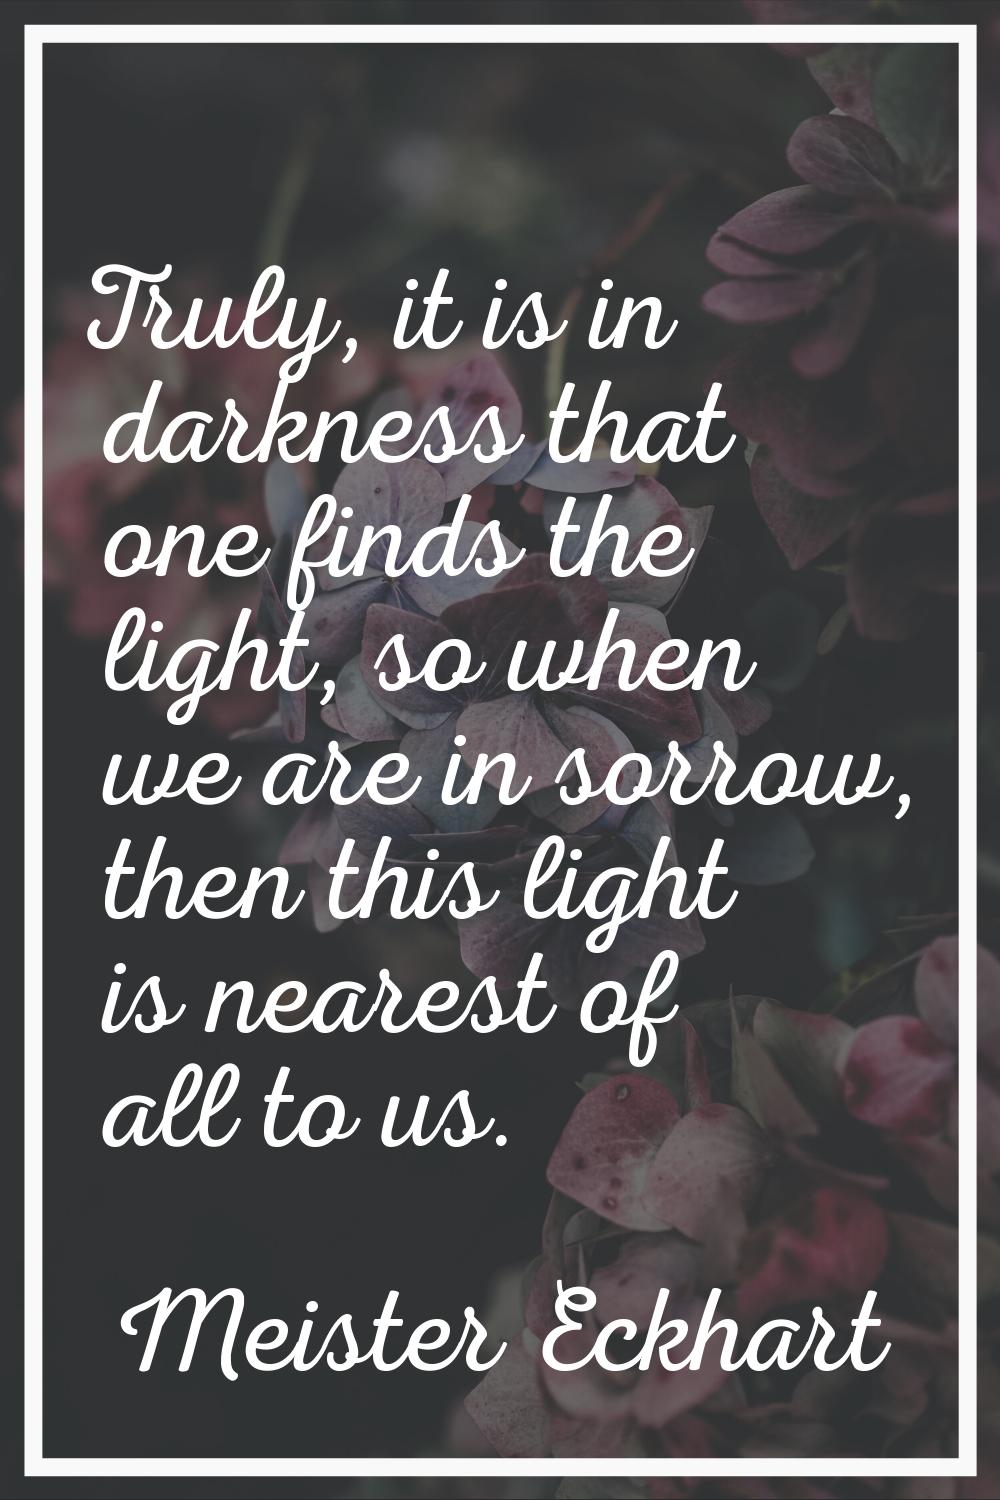 Truly, it is in darkness that one finds the light, so when we are in sorrow, then this light is nea